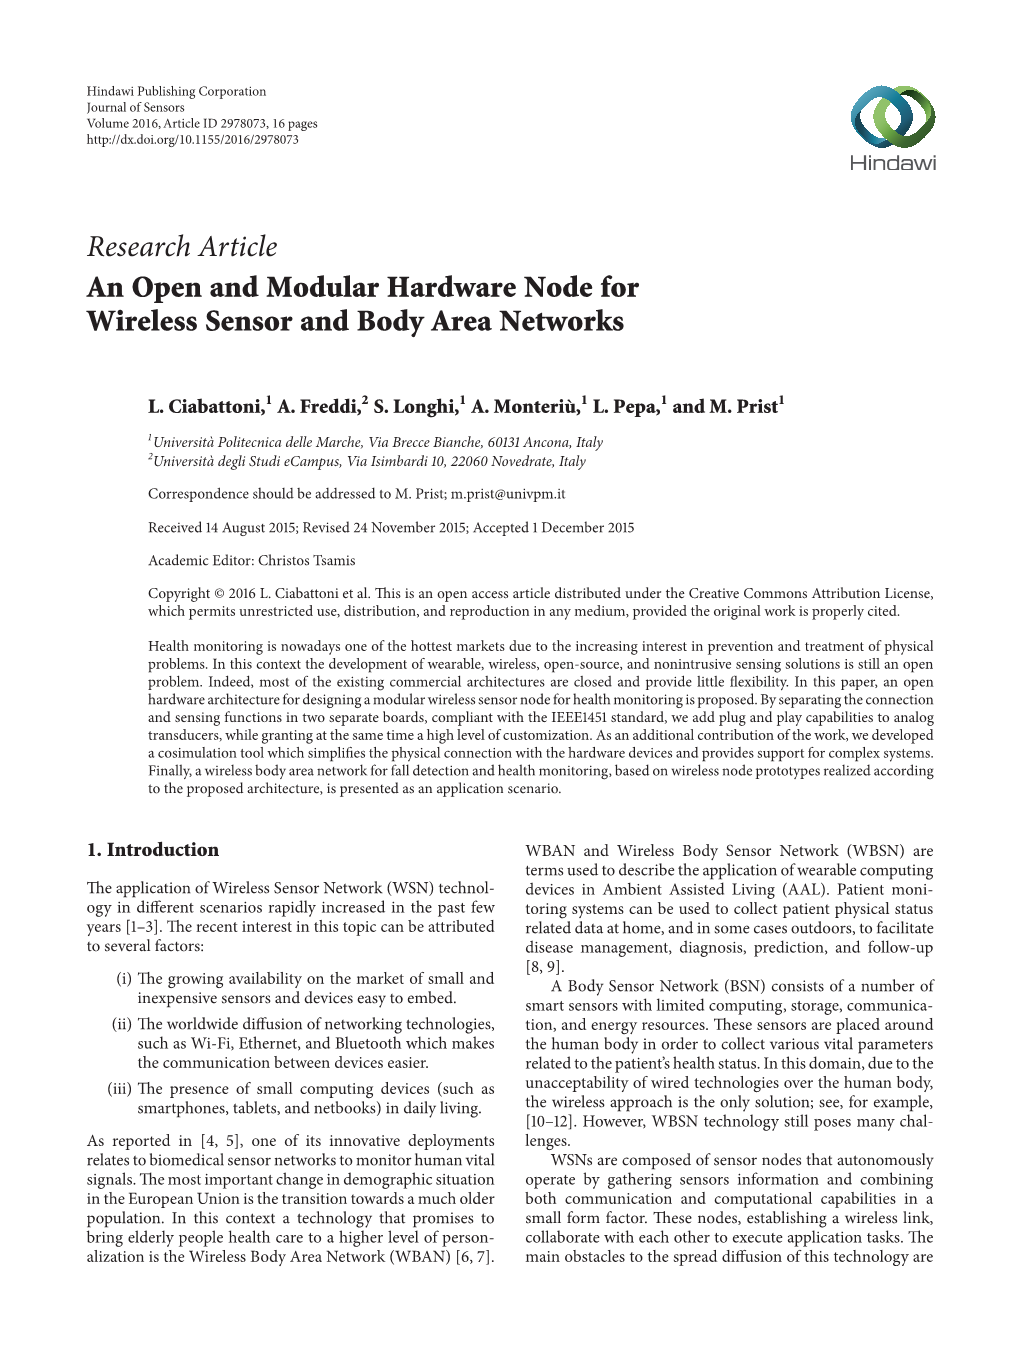 An Open and Modular Hardware Node for Wireless Sensor and Body Area Networks